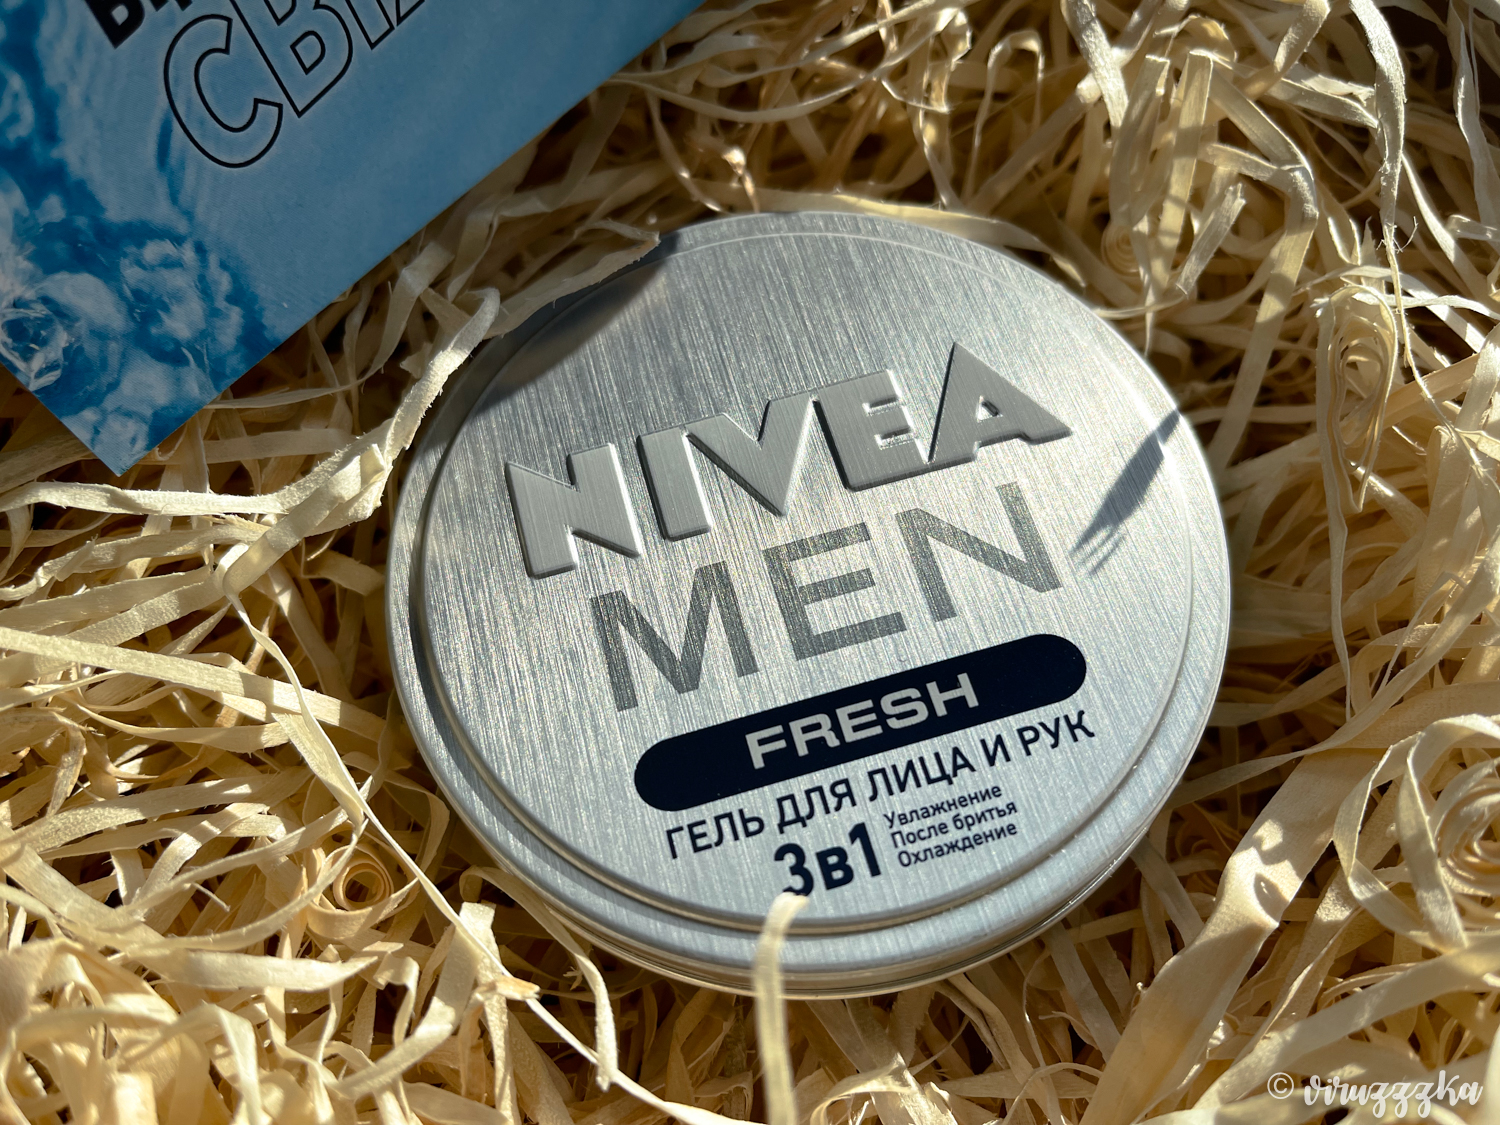 nivea men fresh gel for face and body 3 in 1 review